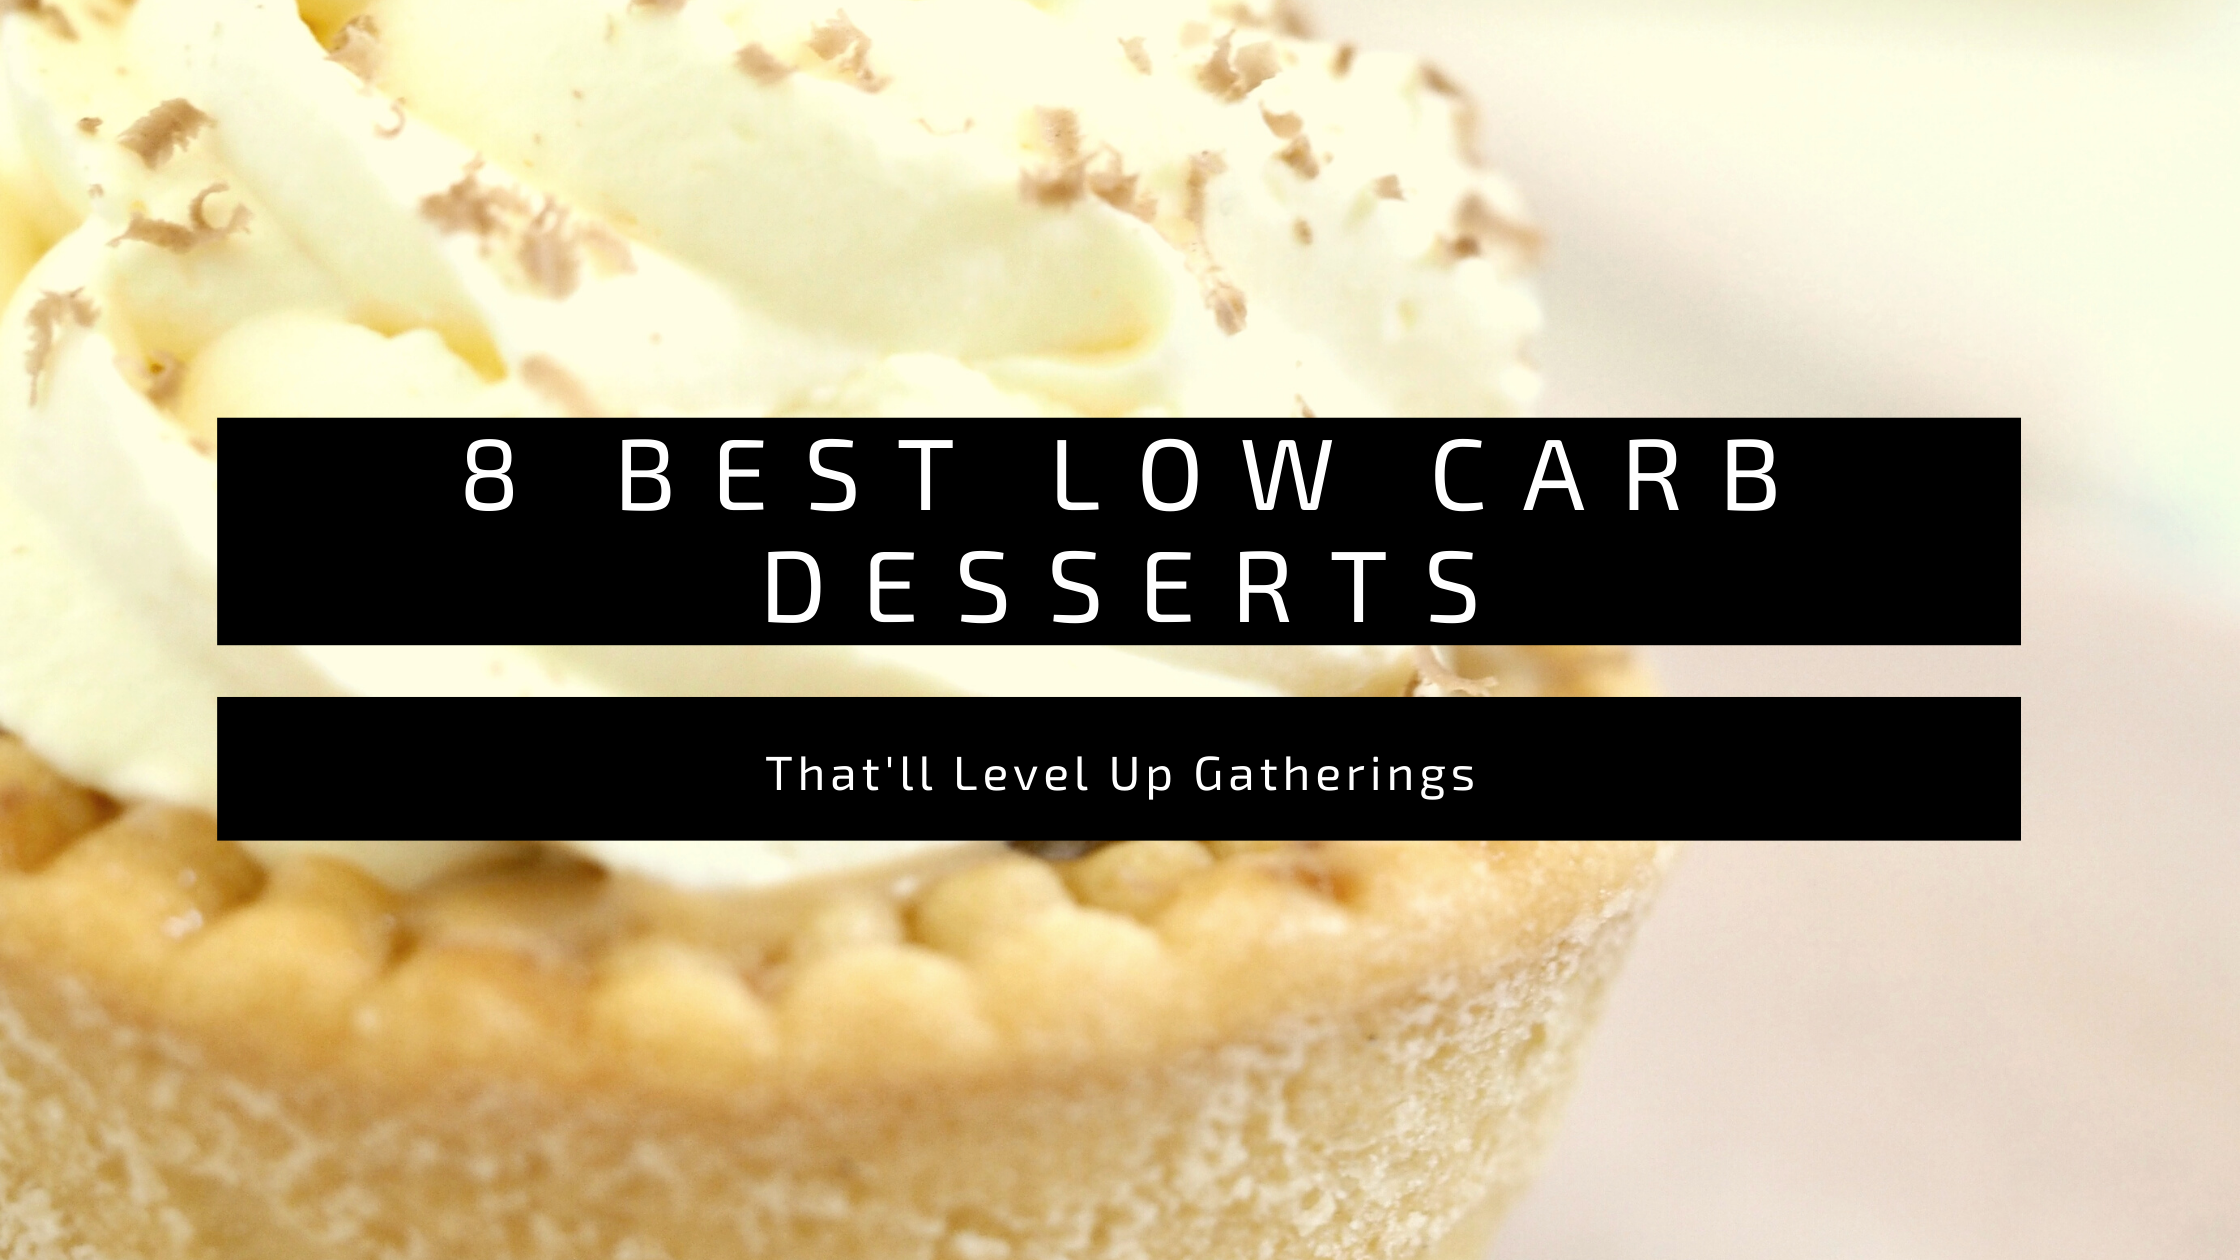 8 Best Low Carb Desserts That'll Level Up Gatherings 1